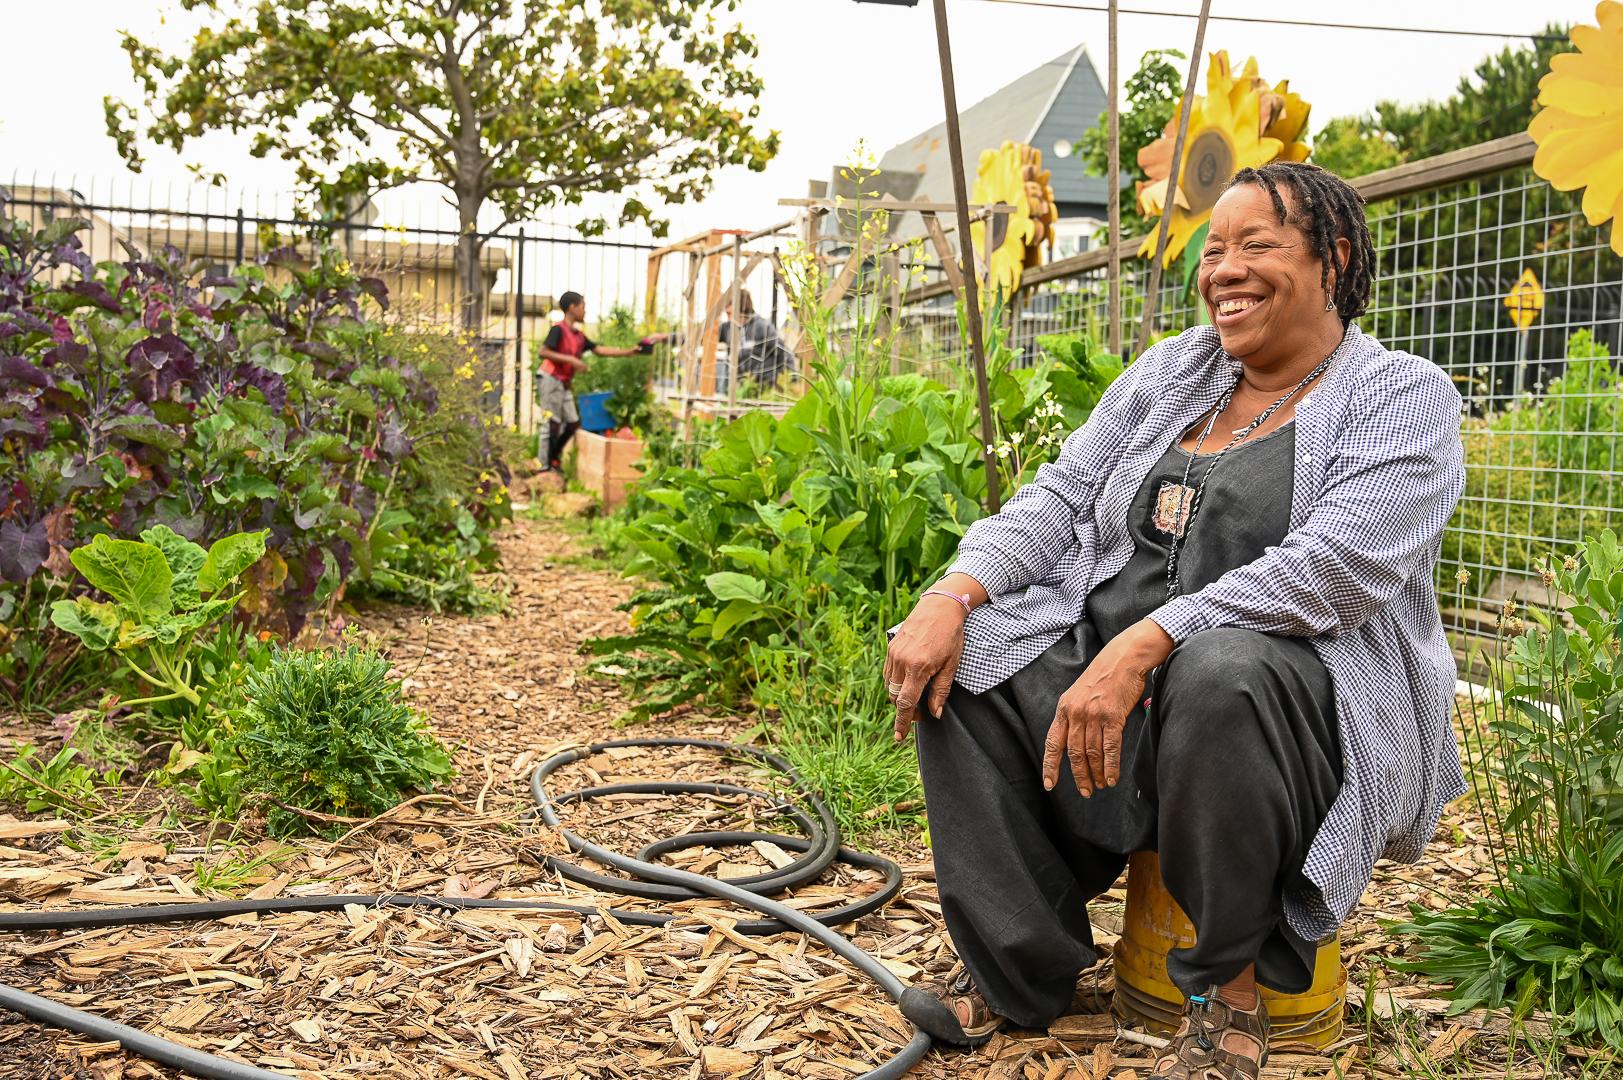 Wanda Stewart is a Trusted Leader in East Bay's Food Justice Movement.